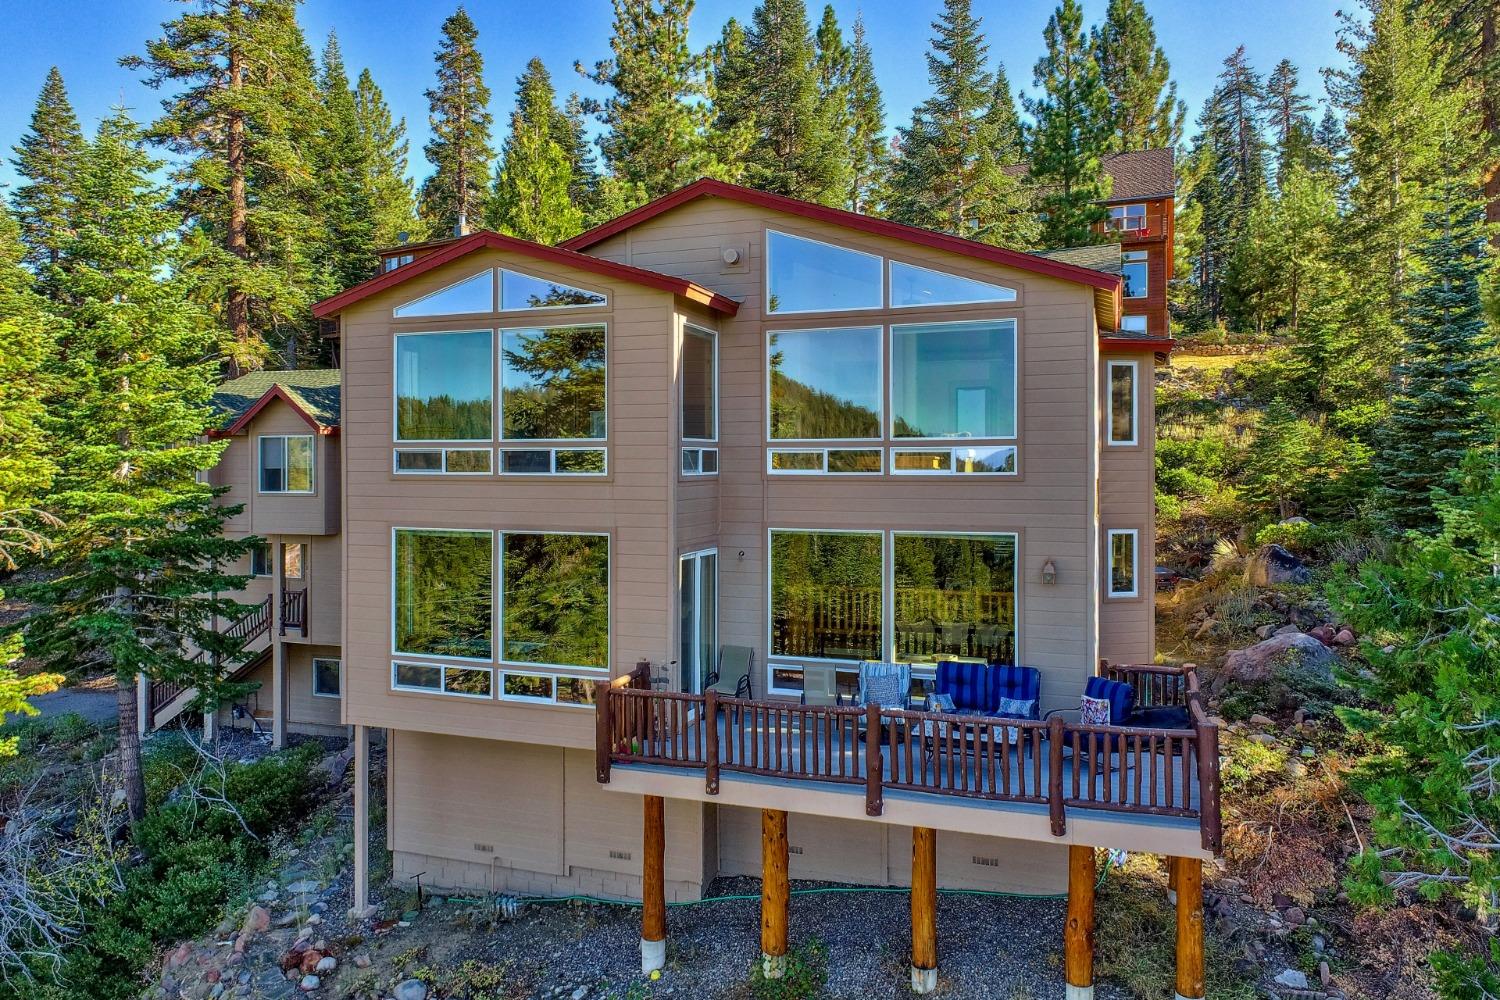 Photo of 321 Glenmore Wy in South Lake Tahoe, CA